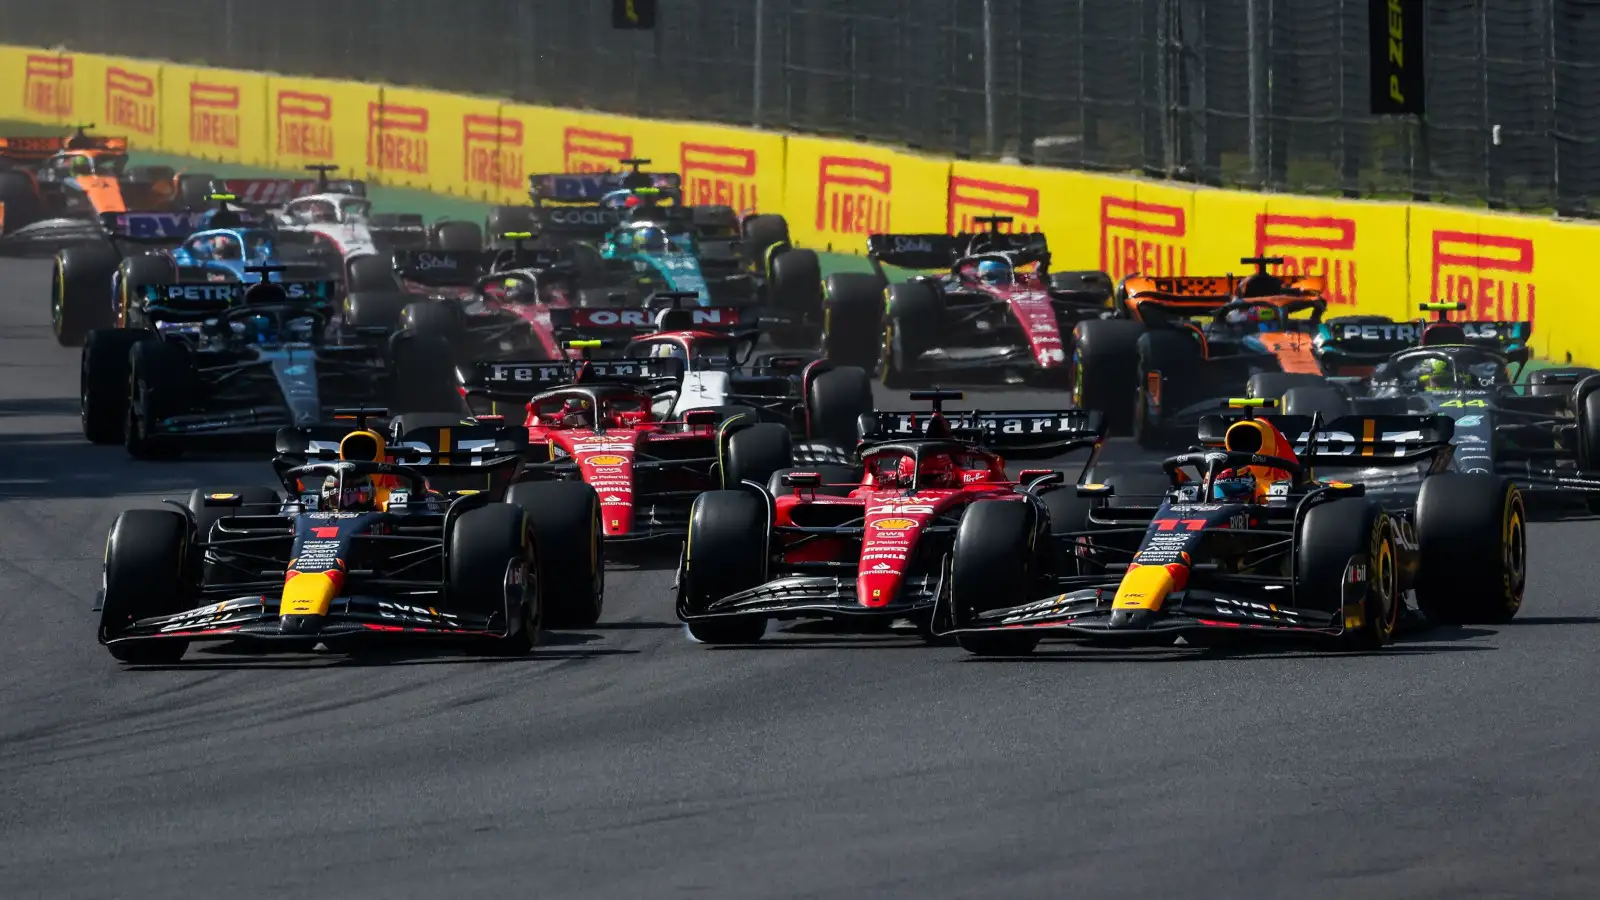 The start of the Mexican Grand Prix as Max Verstappen surges ahead into Turn 1.